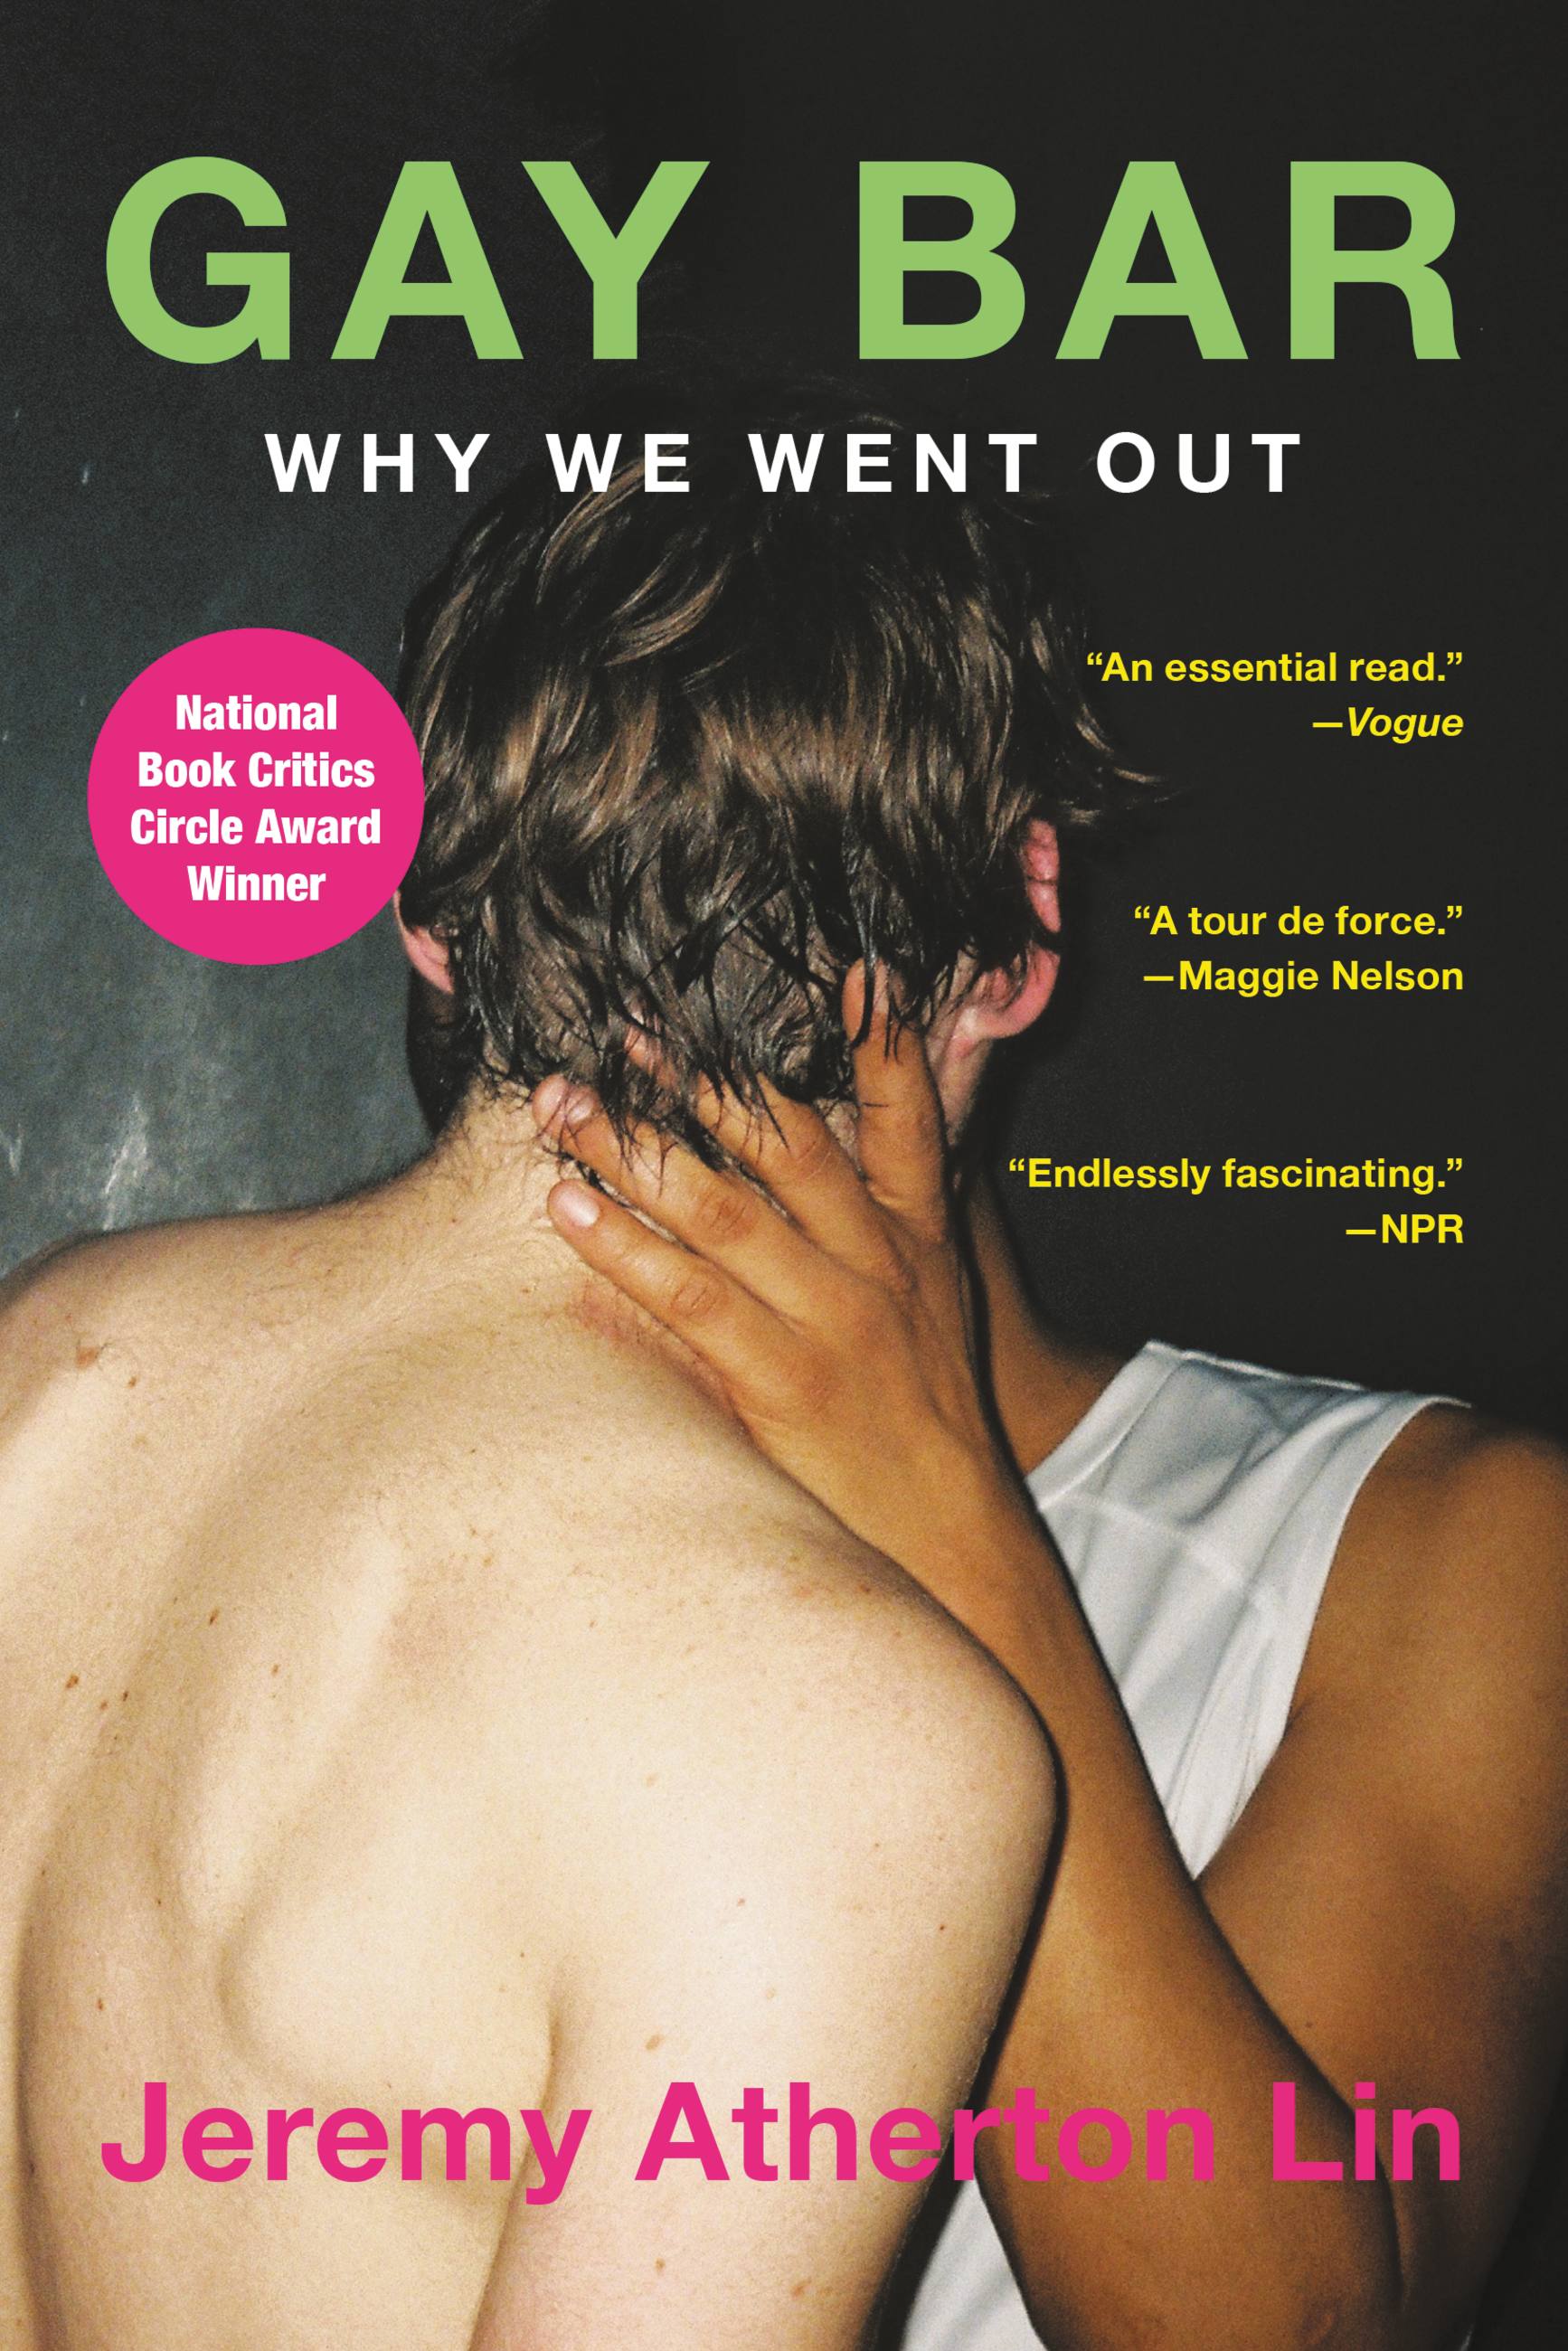 Gay Bar by Jeremy Atherton Lin Hachette Book Group image photo